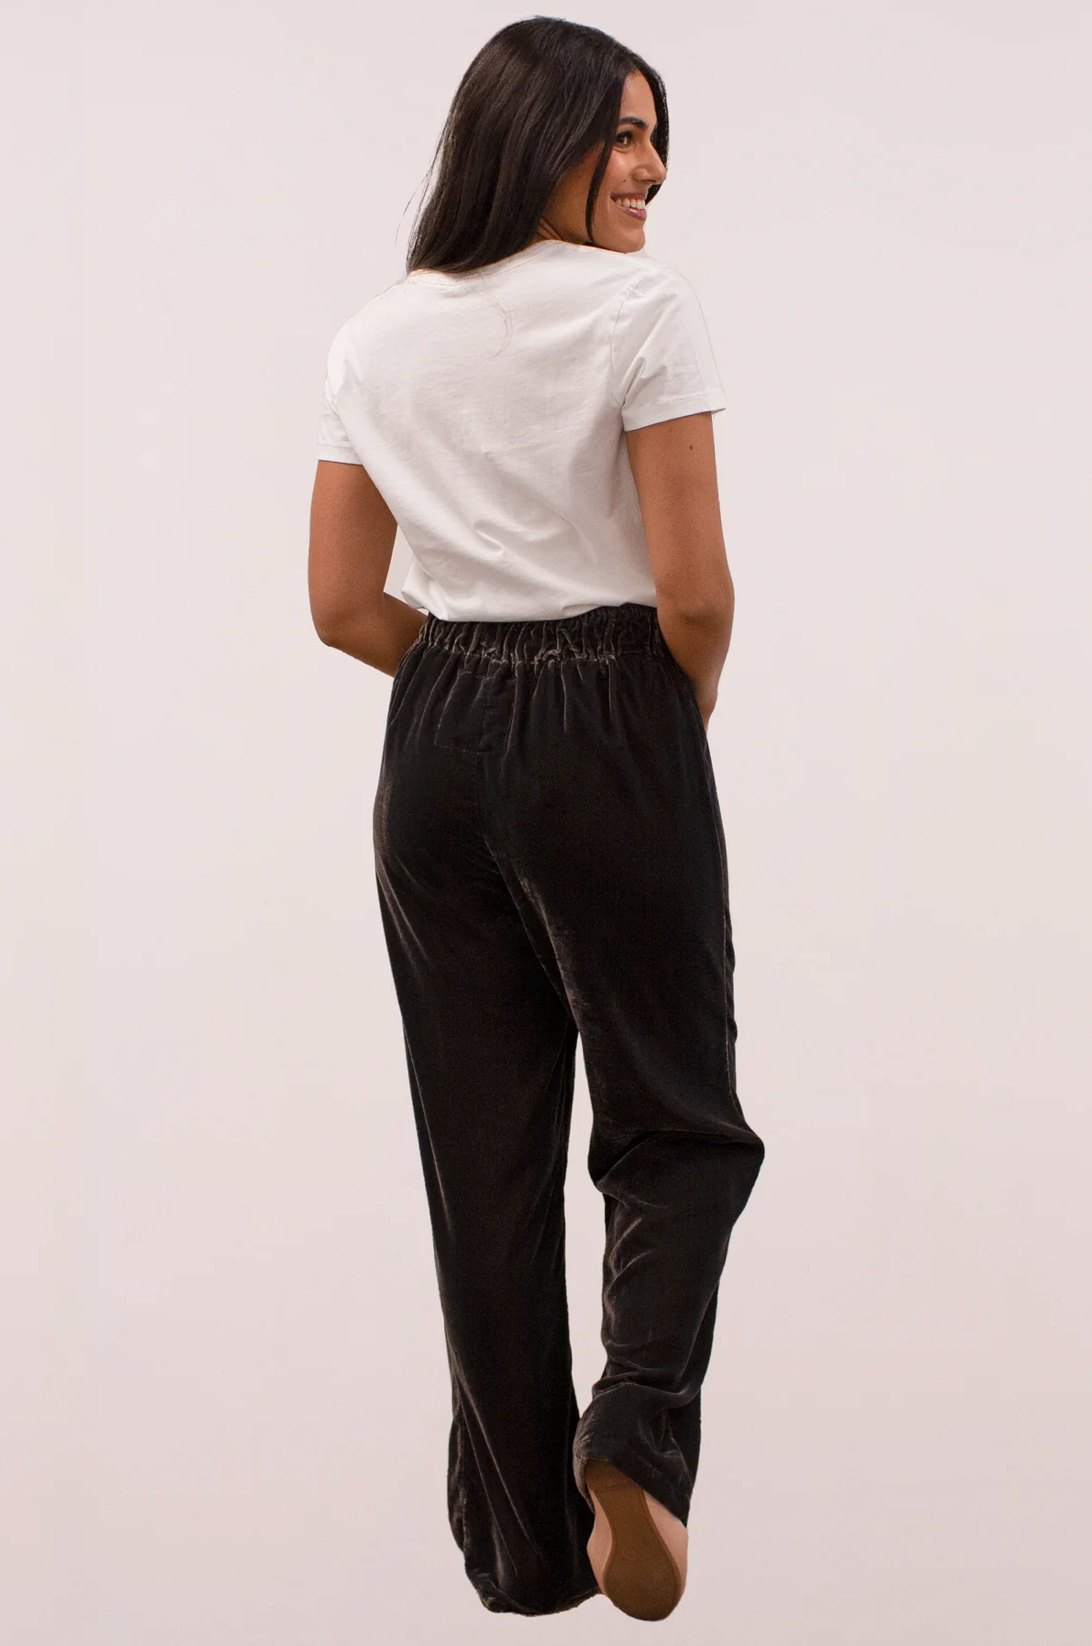 Caite - Kyla Seo Marin Pant - Black available at The Good Life Boutique